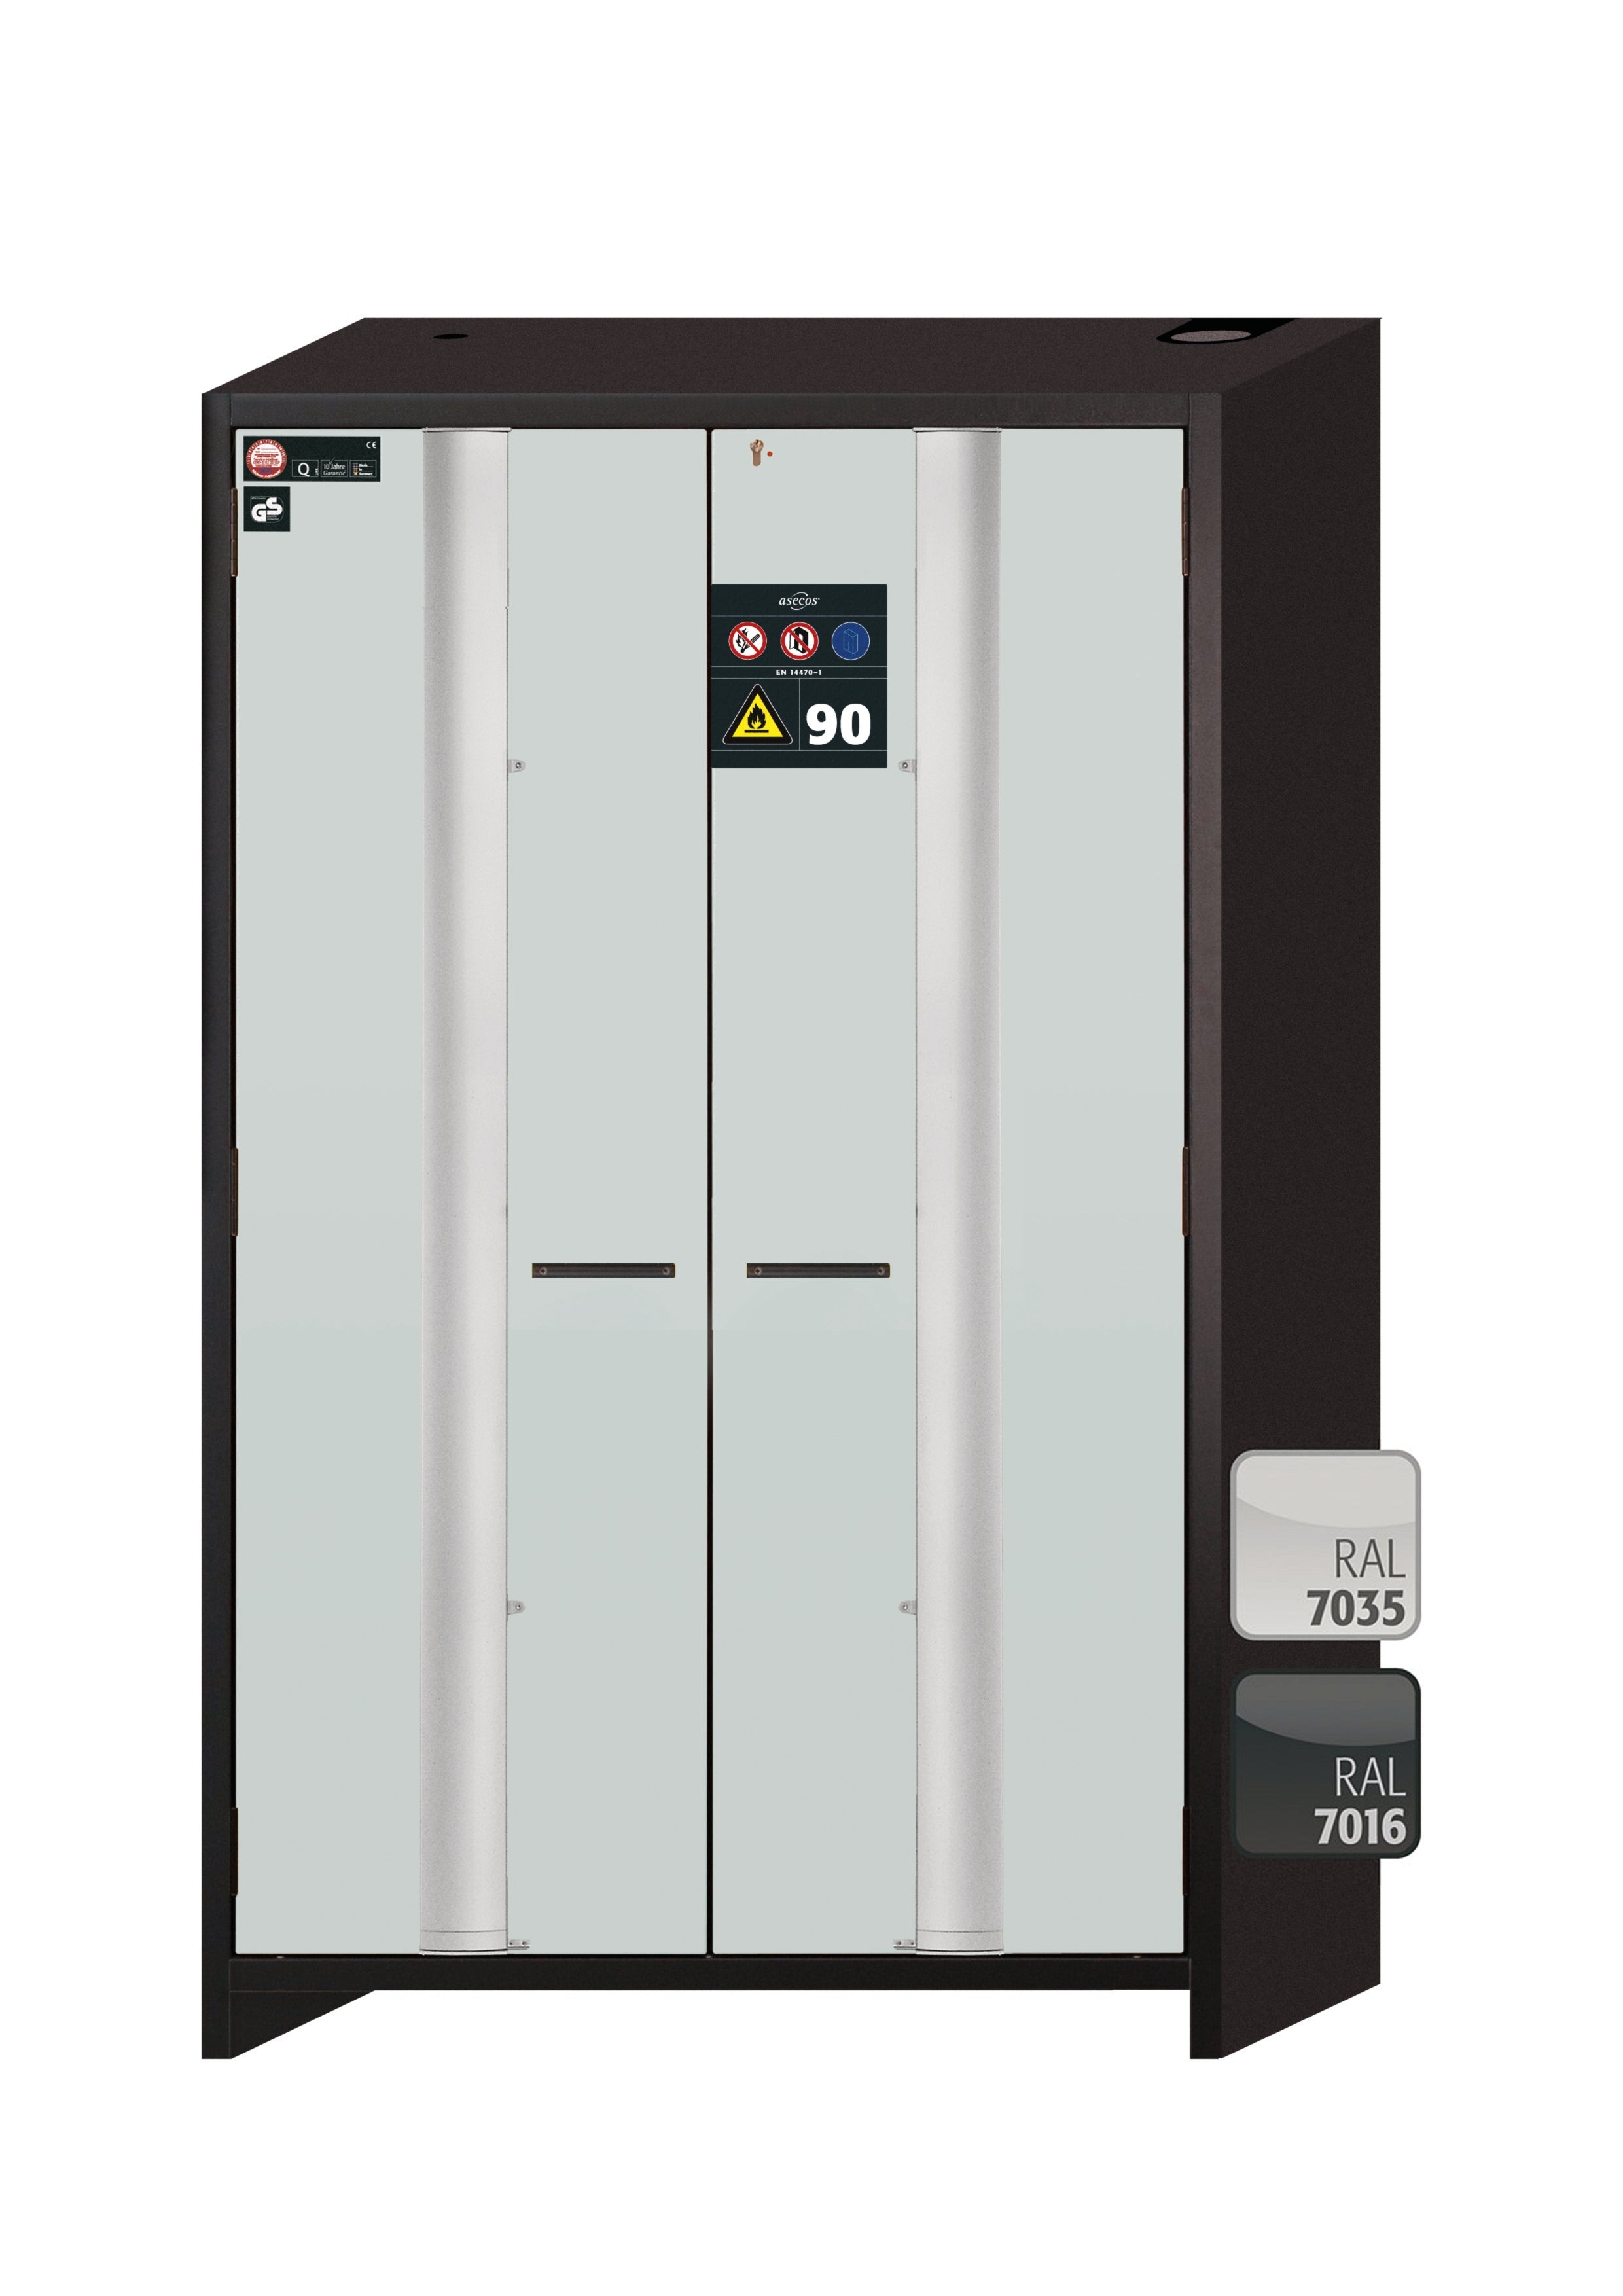 Type 90 safety cabinet Q-PHOENIX-90 model Q90.195.120.FD in light gray RAL 7035 with 2x standard tray base (polypropylene)